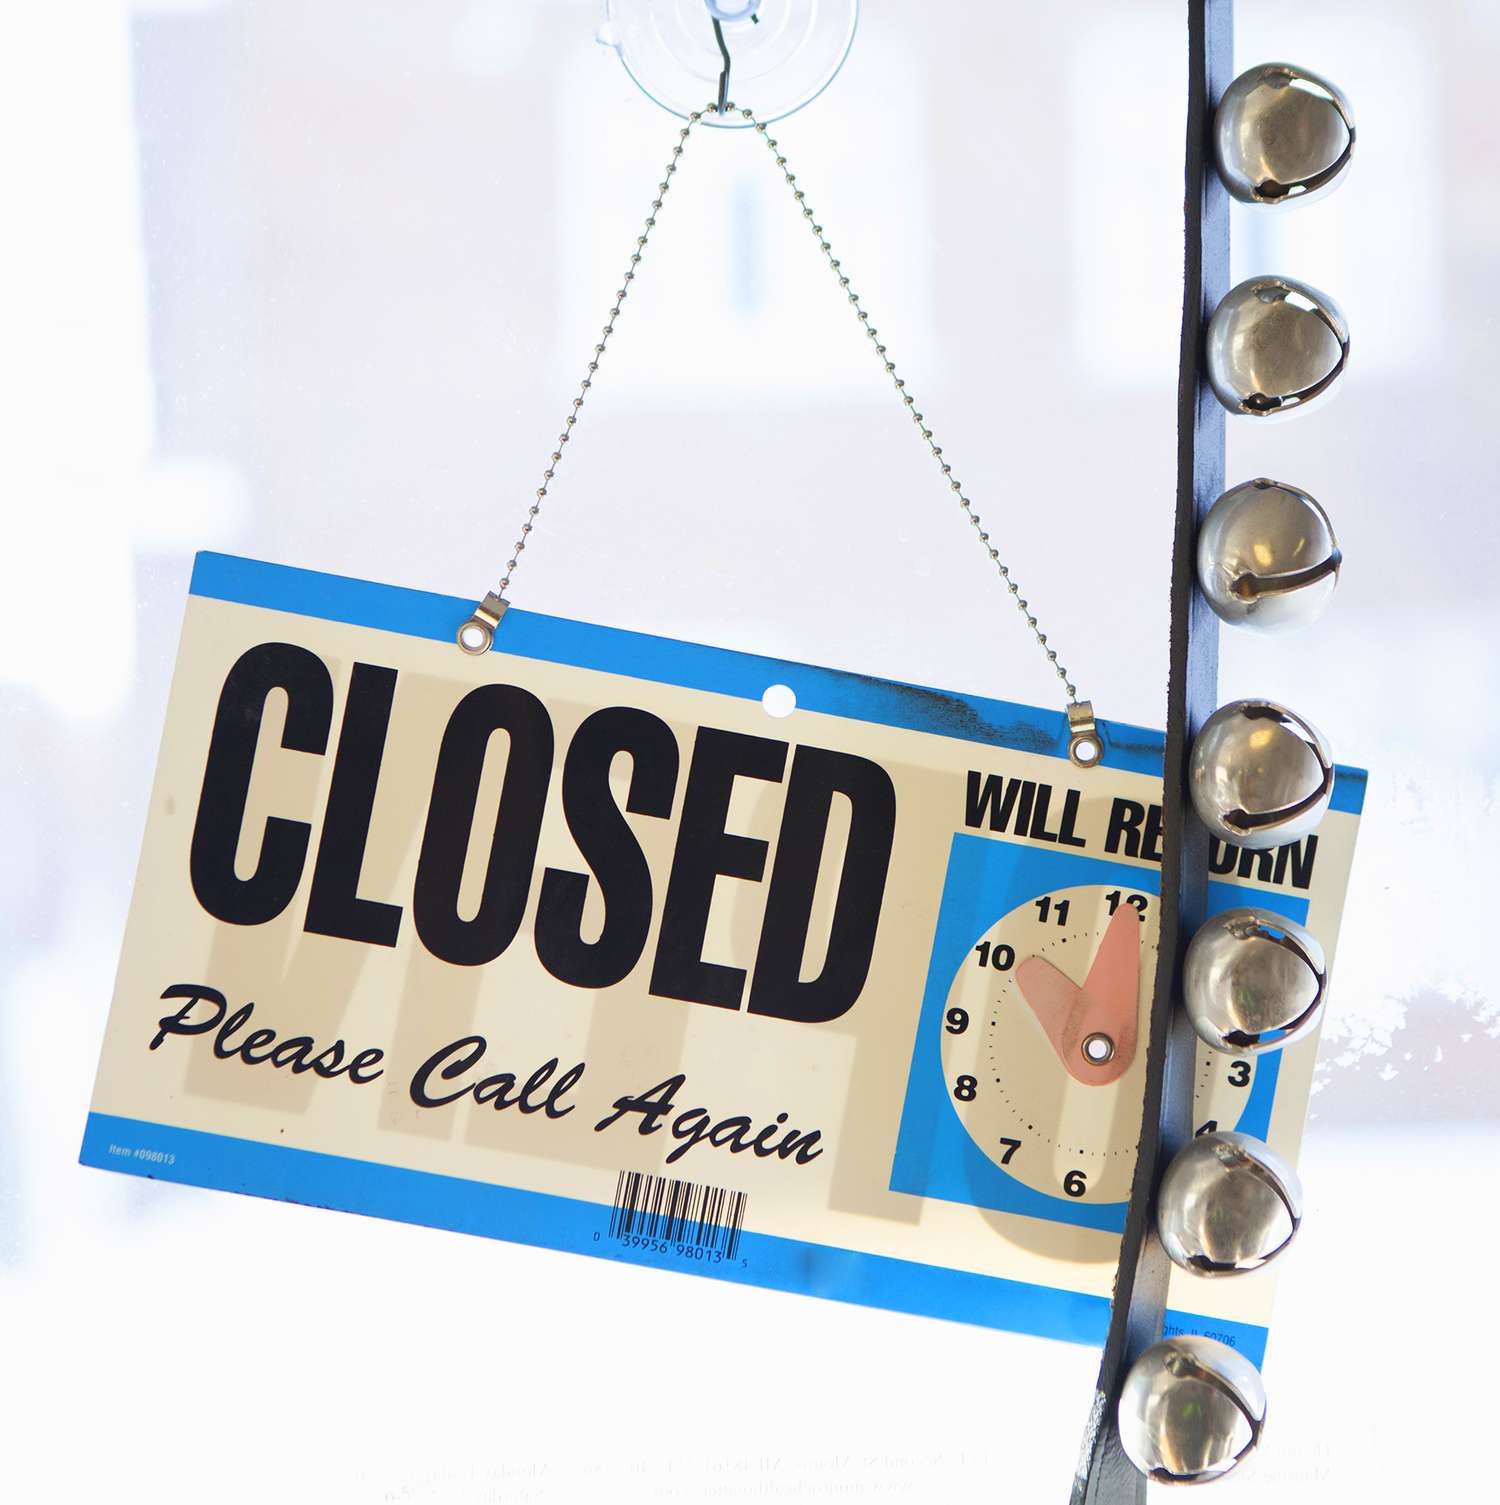 Closed sign at store